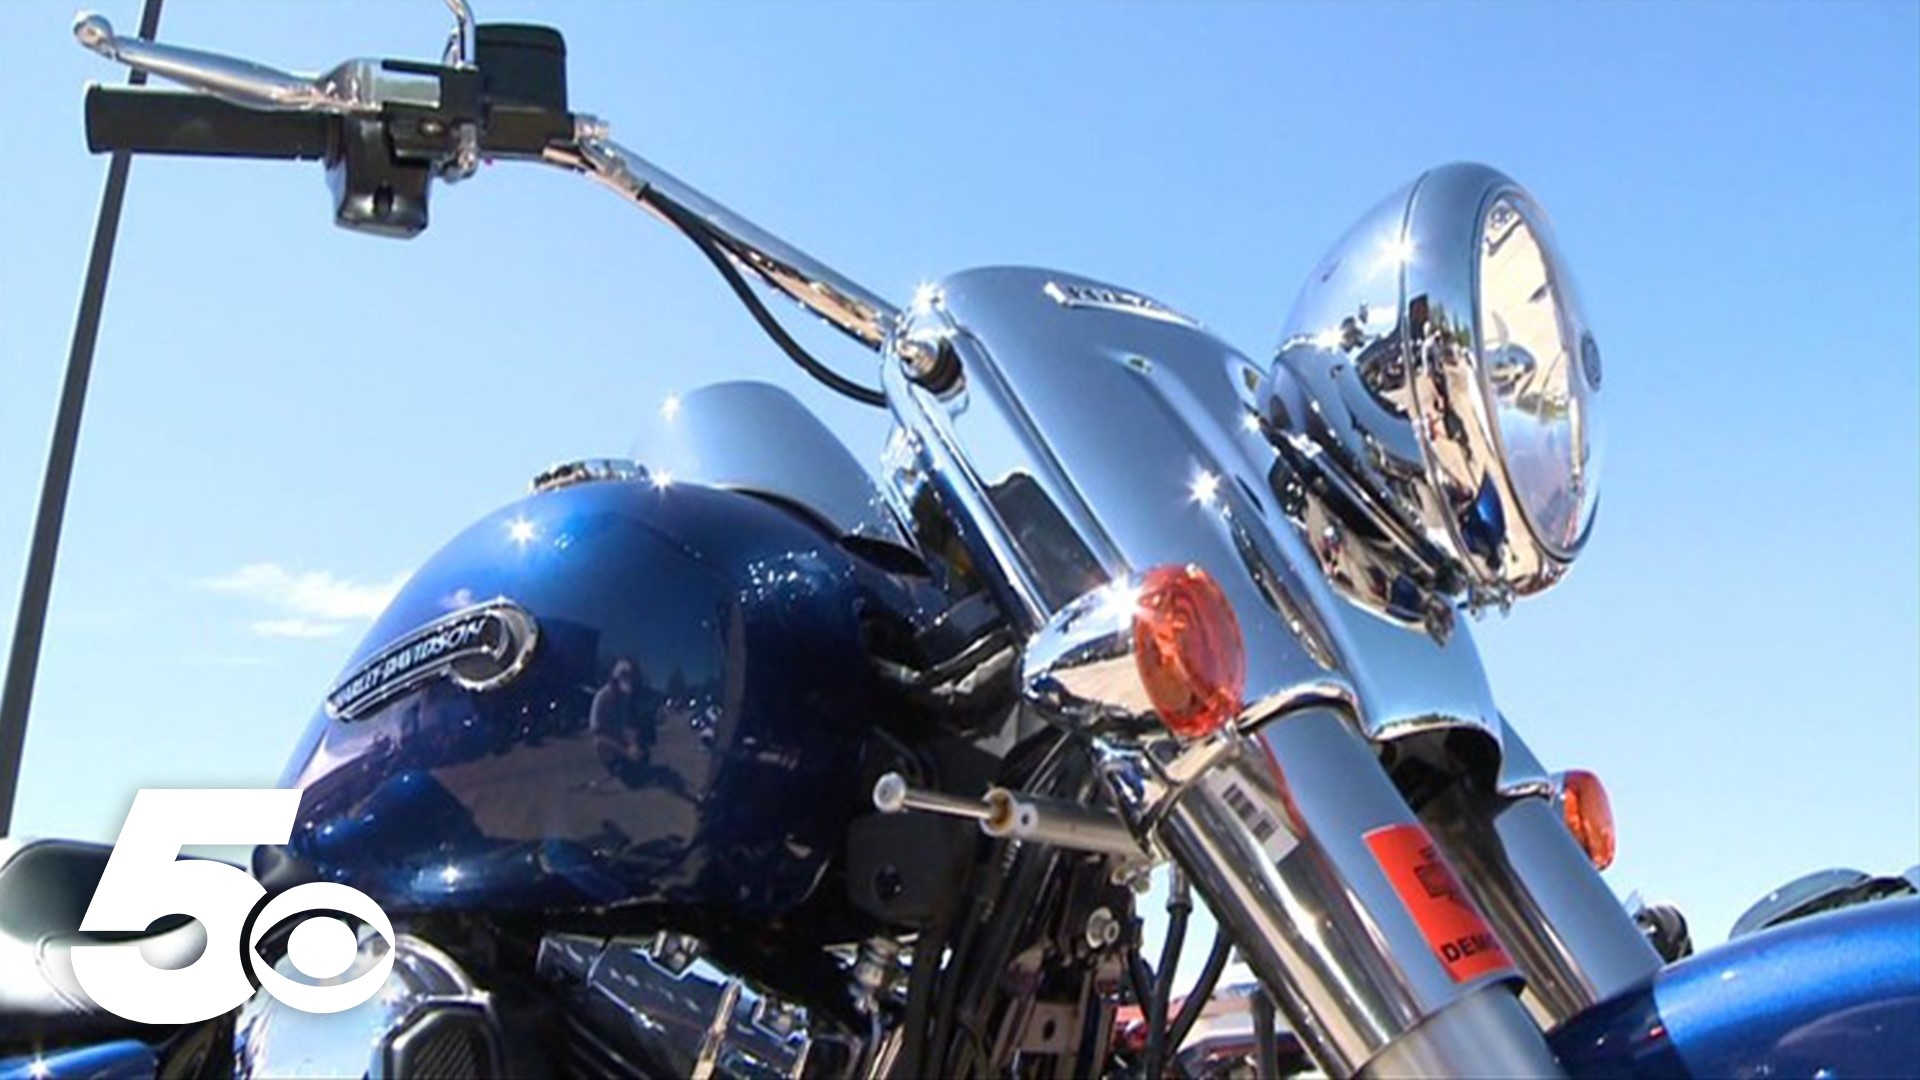 Bikes, Blues & BBQ is kicking off this week and Rogers is preparing for the motorcycle rally. Here's what you need to know, from events to road closures.